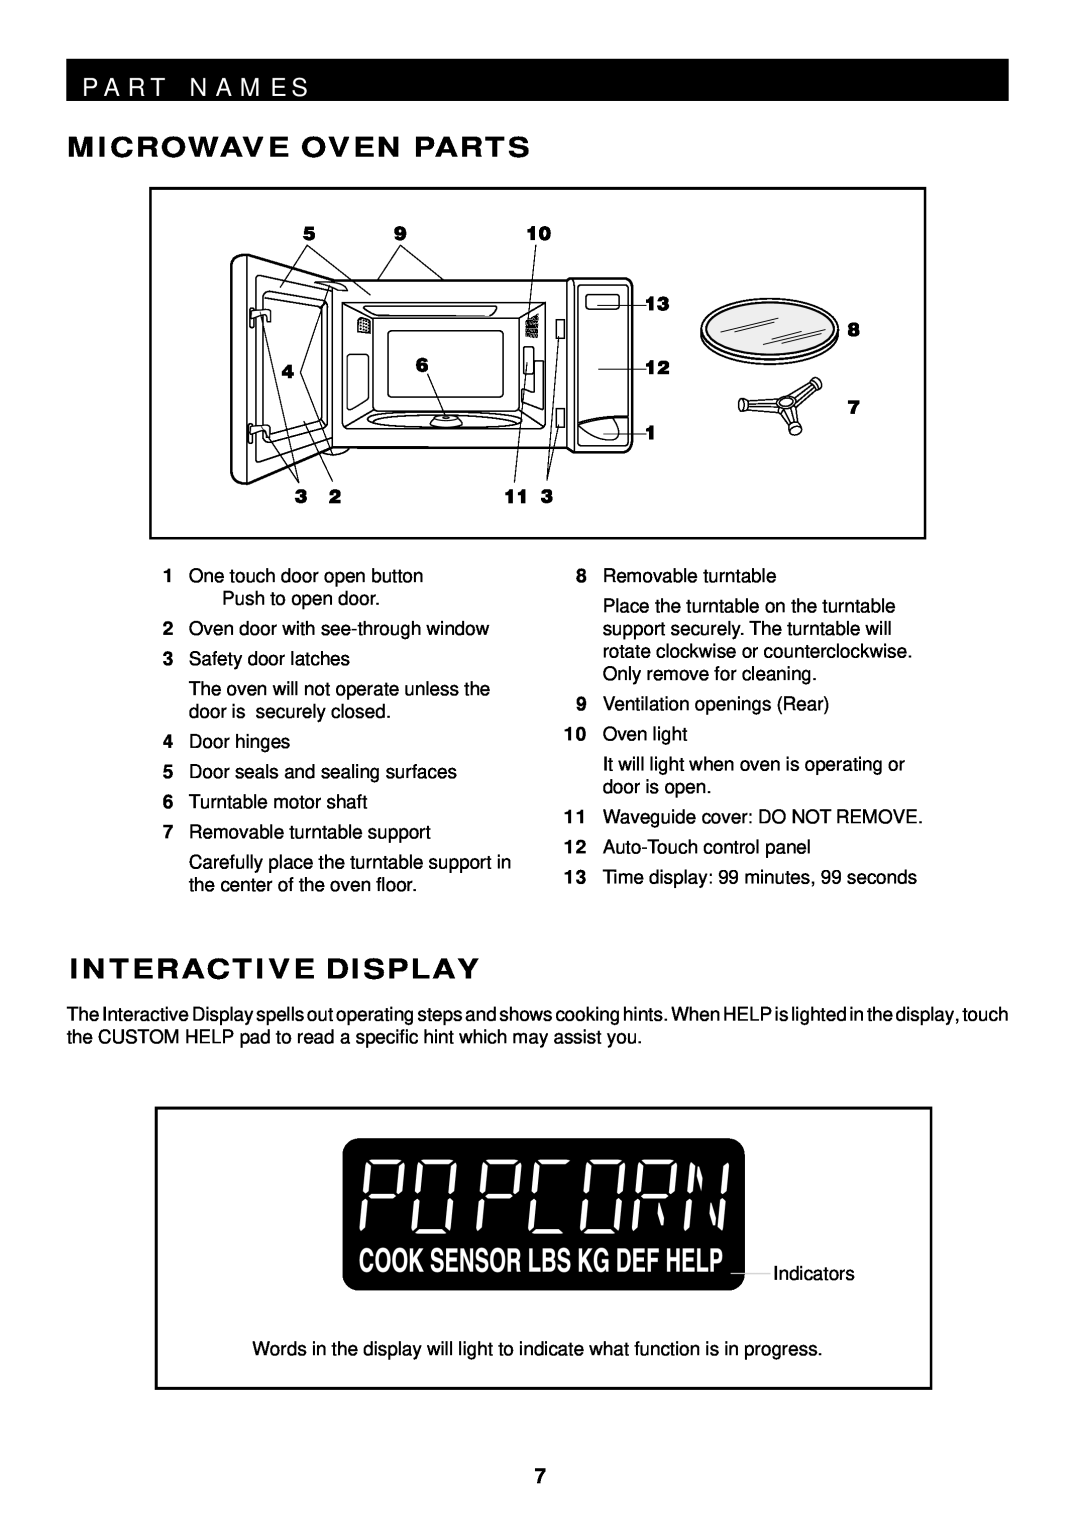 Sharp R-520D, R-420D operation manual P A R T N A M E S, Microwave Oven Parts, Interactive Display 